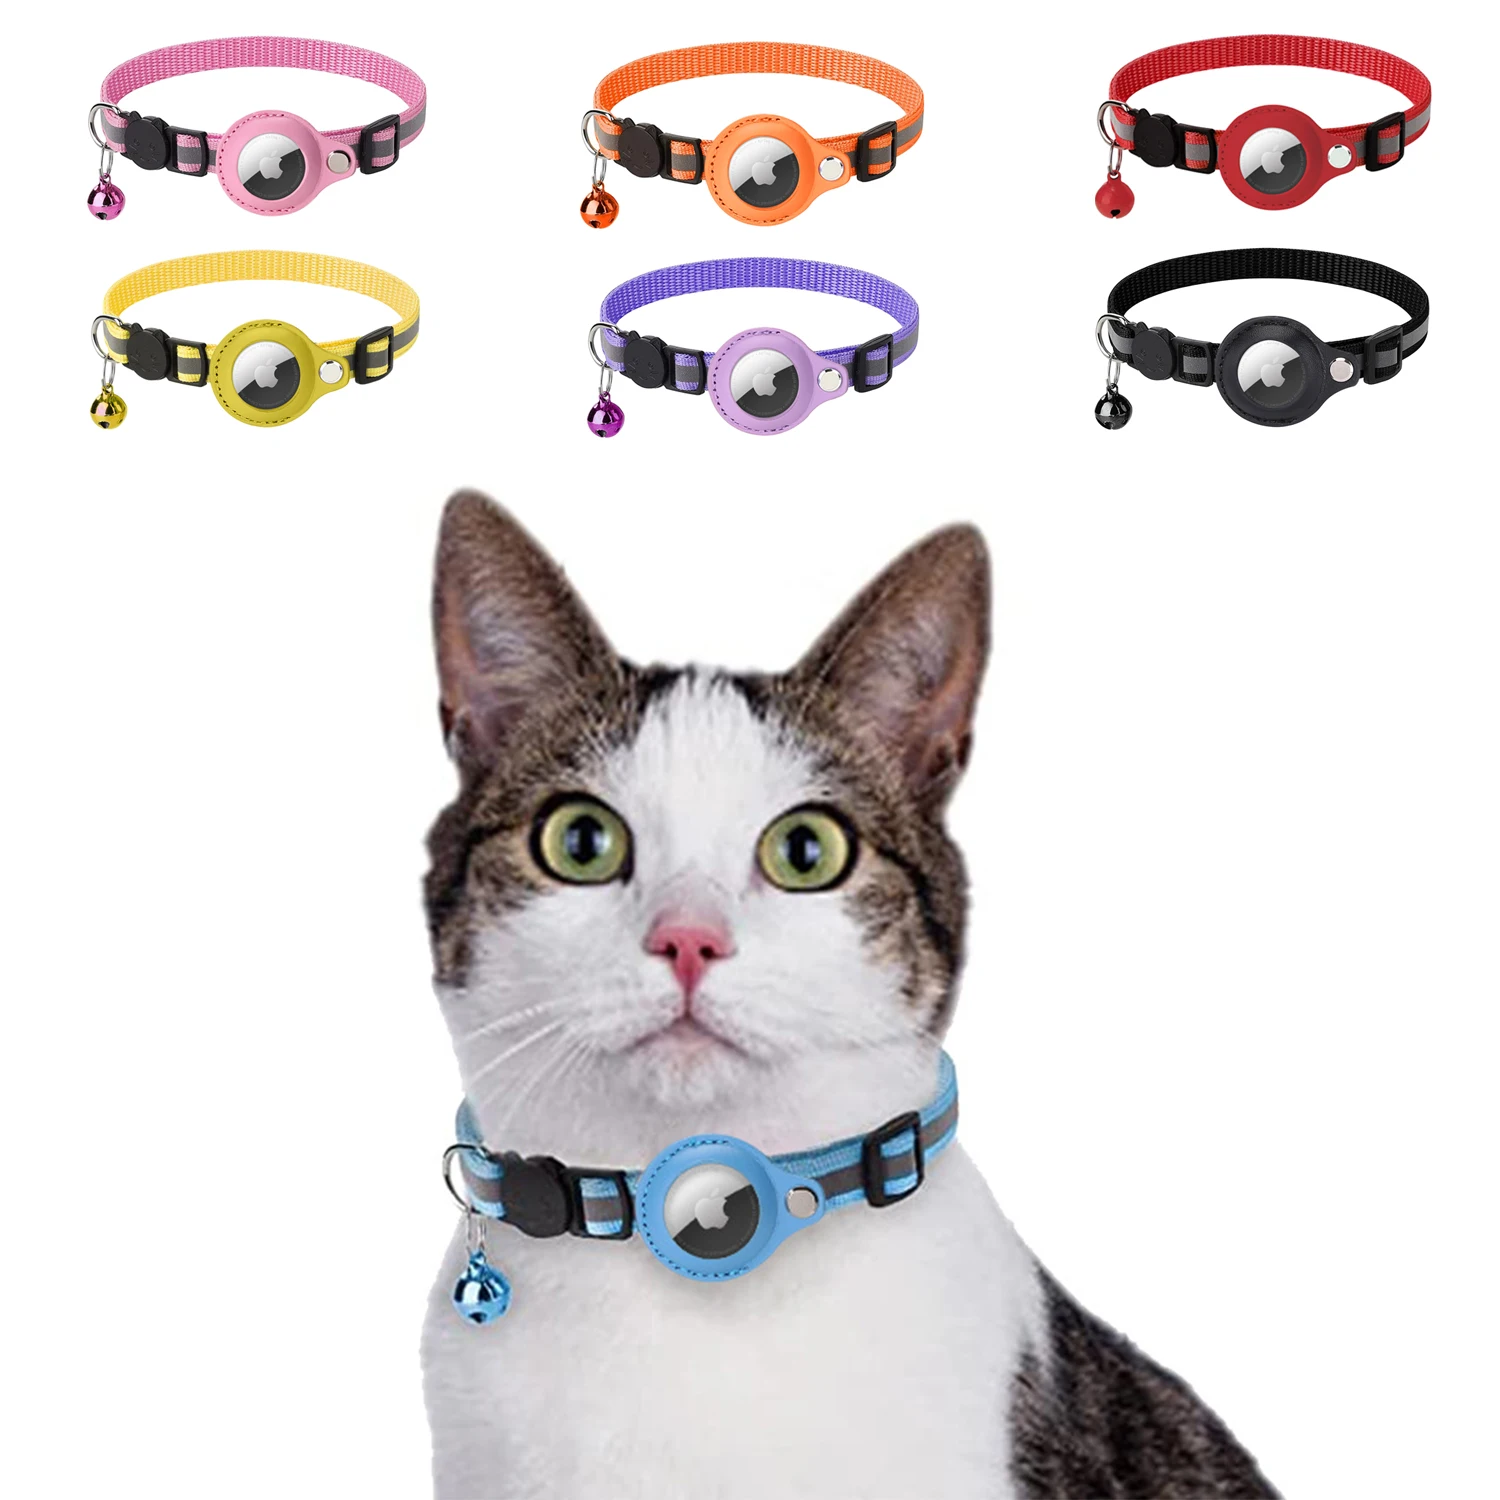 

Airtag Case Collar For Cats Pet Protective Case For Apple Airtag Location Tracker Cat Anti-lost AirTag Case Airtags Pet Collar